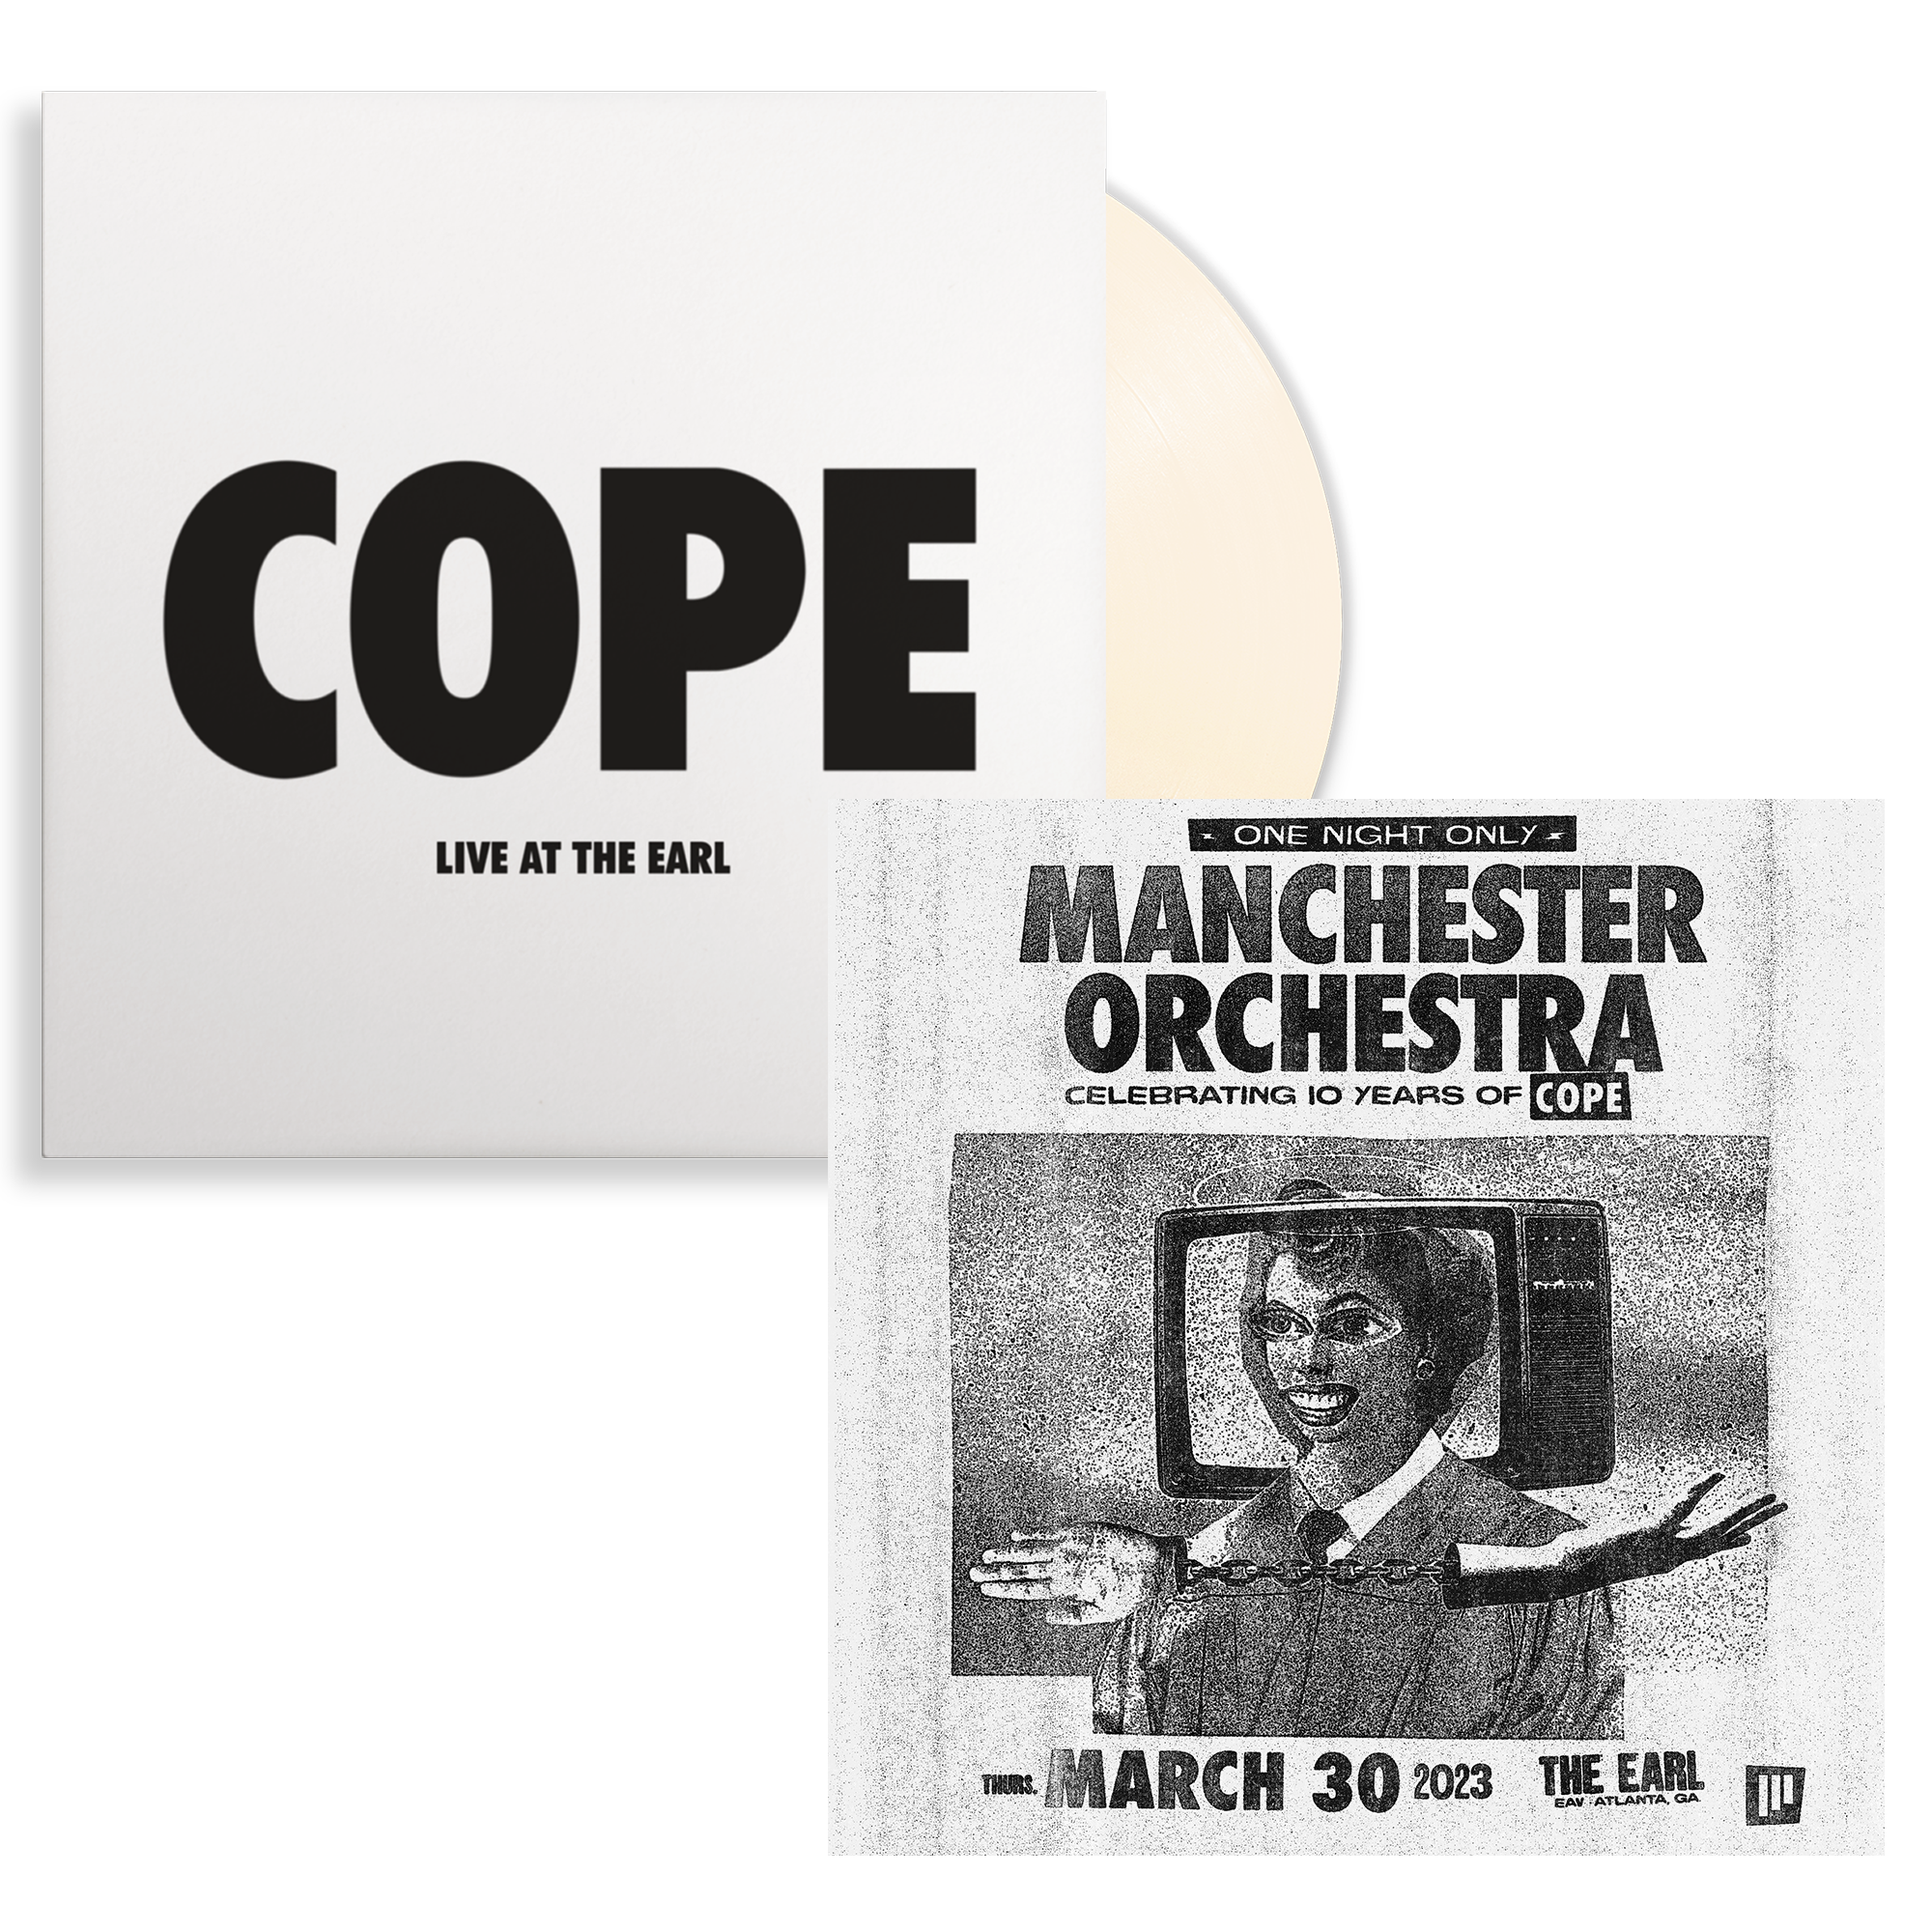 COPE - Live at The Earl: Limited 'Bone' Vinyl LP & Exclusive Print